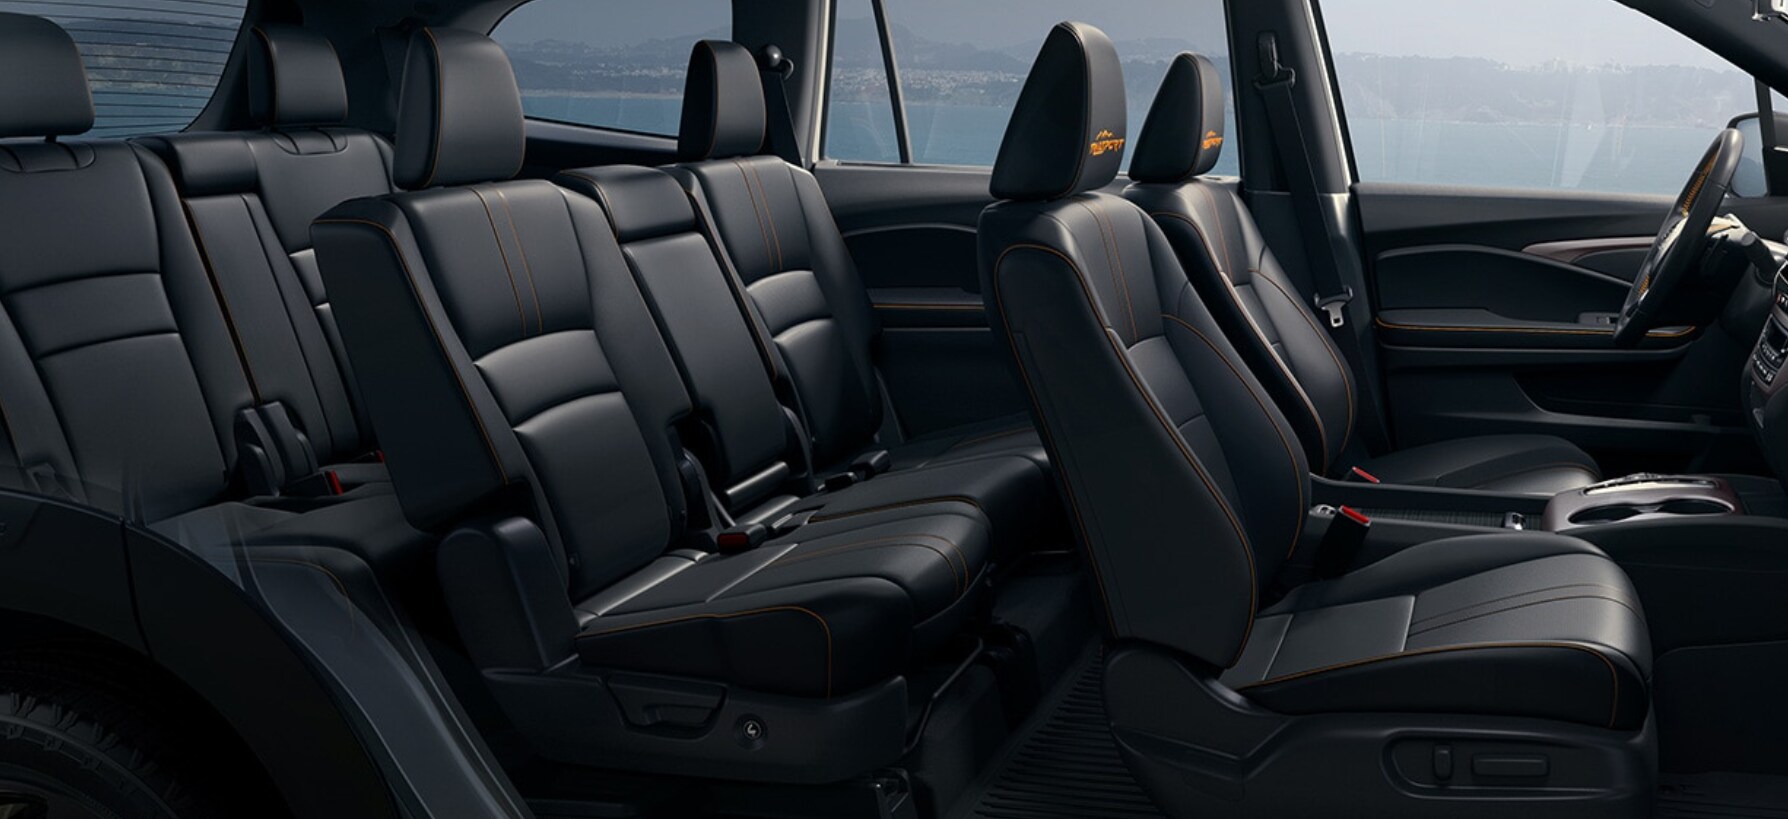 A view of the cabin of a 2022 Honda Pilot upholstered in black leather